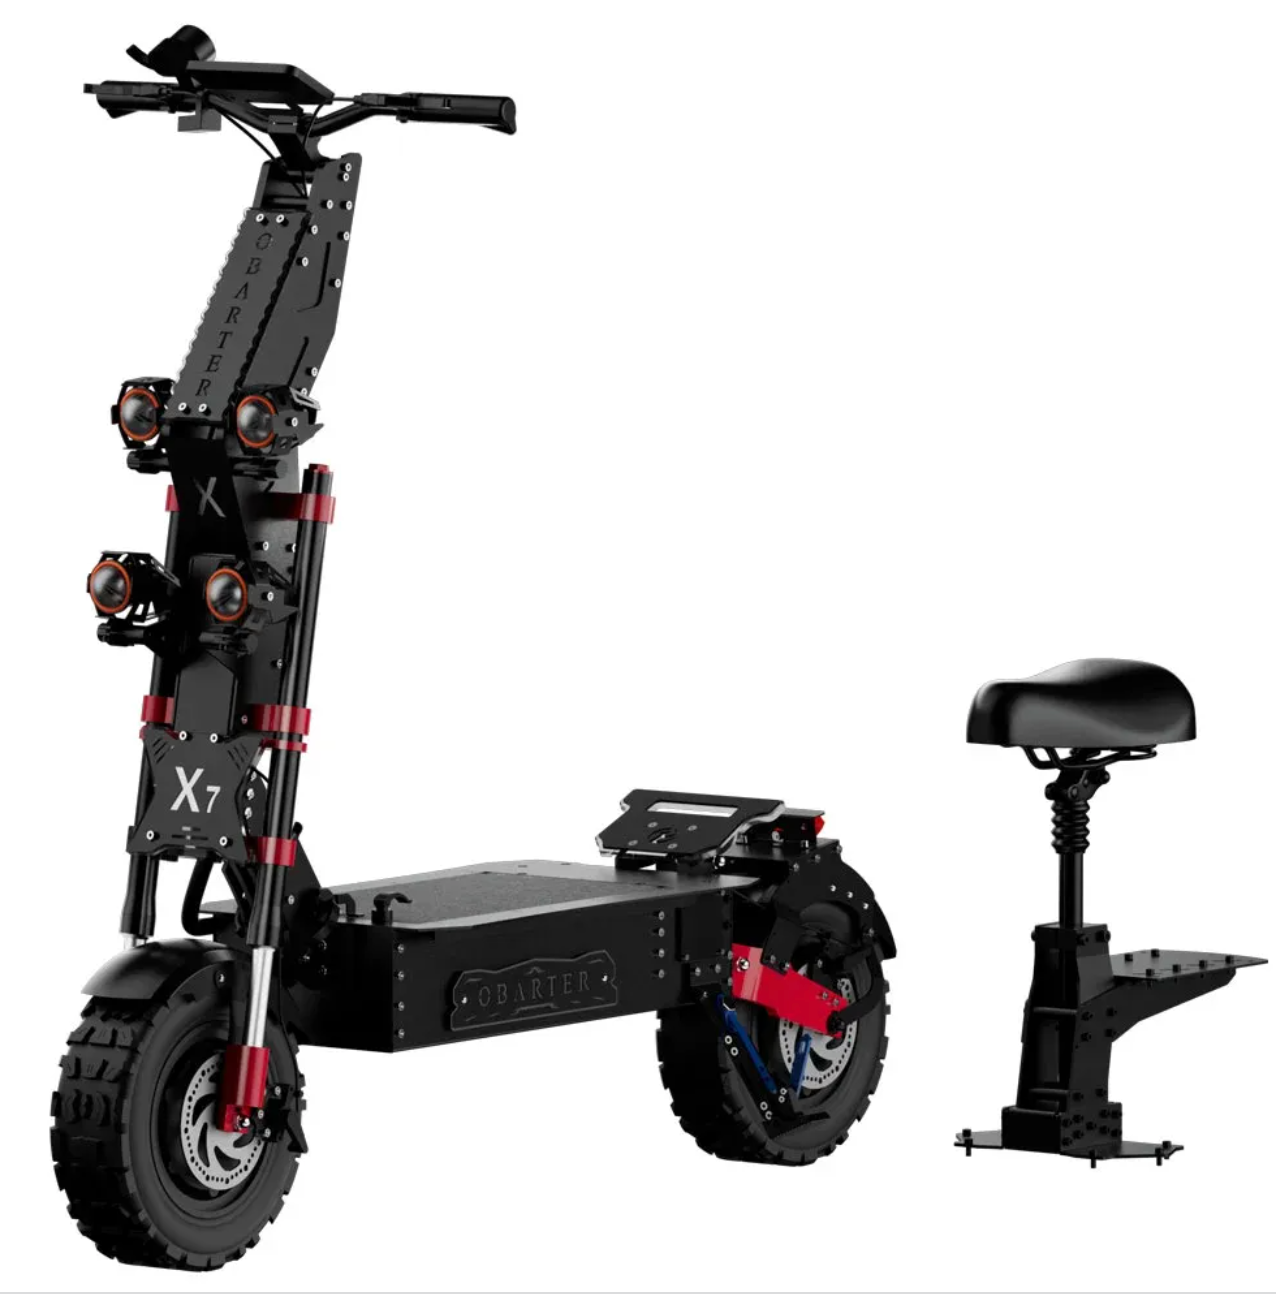 Obarter X7 8000W Monster Electric Scooter